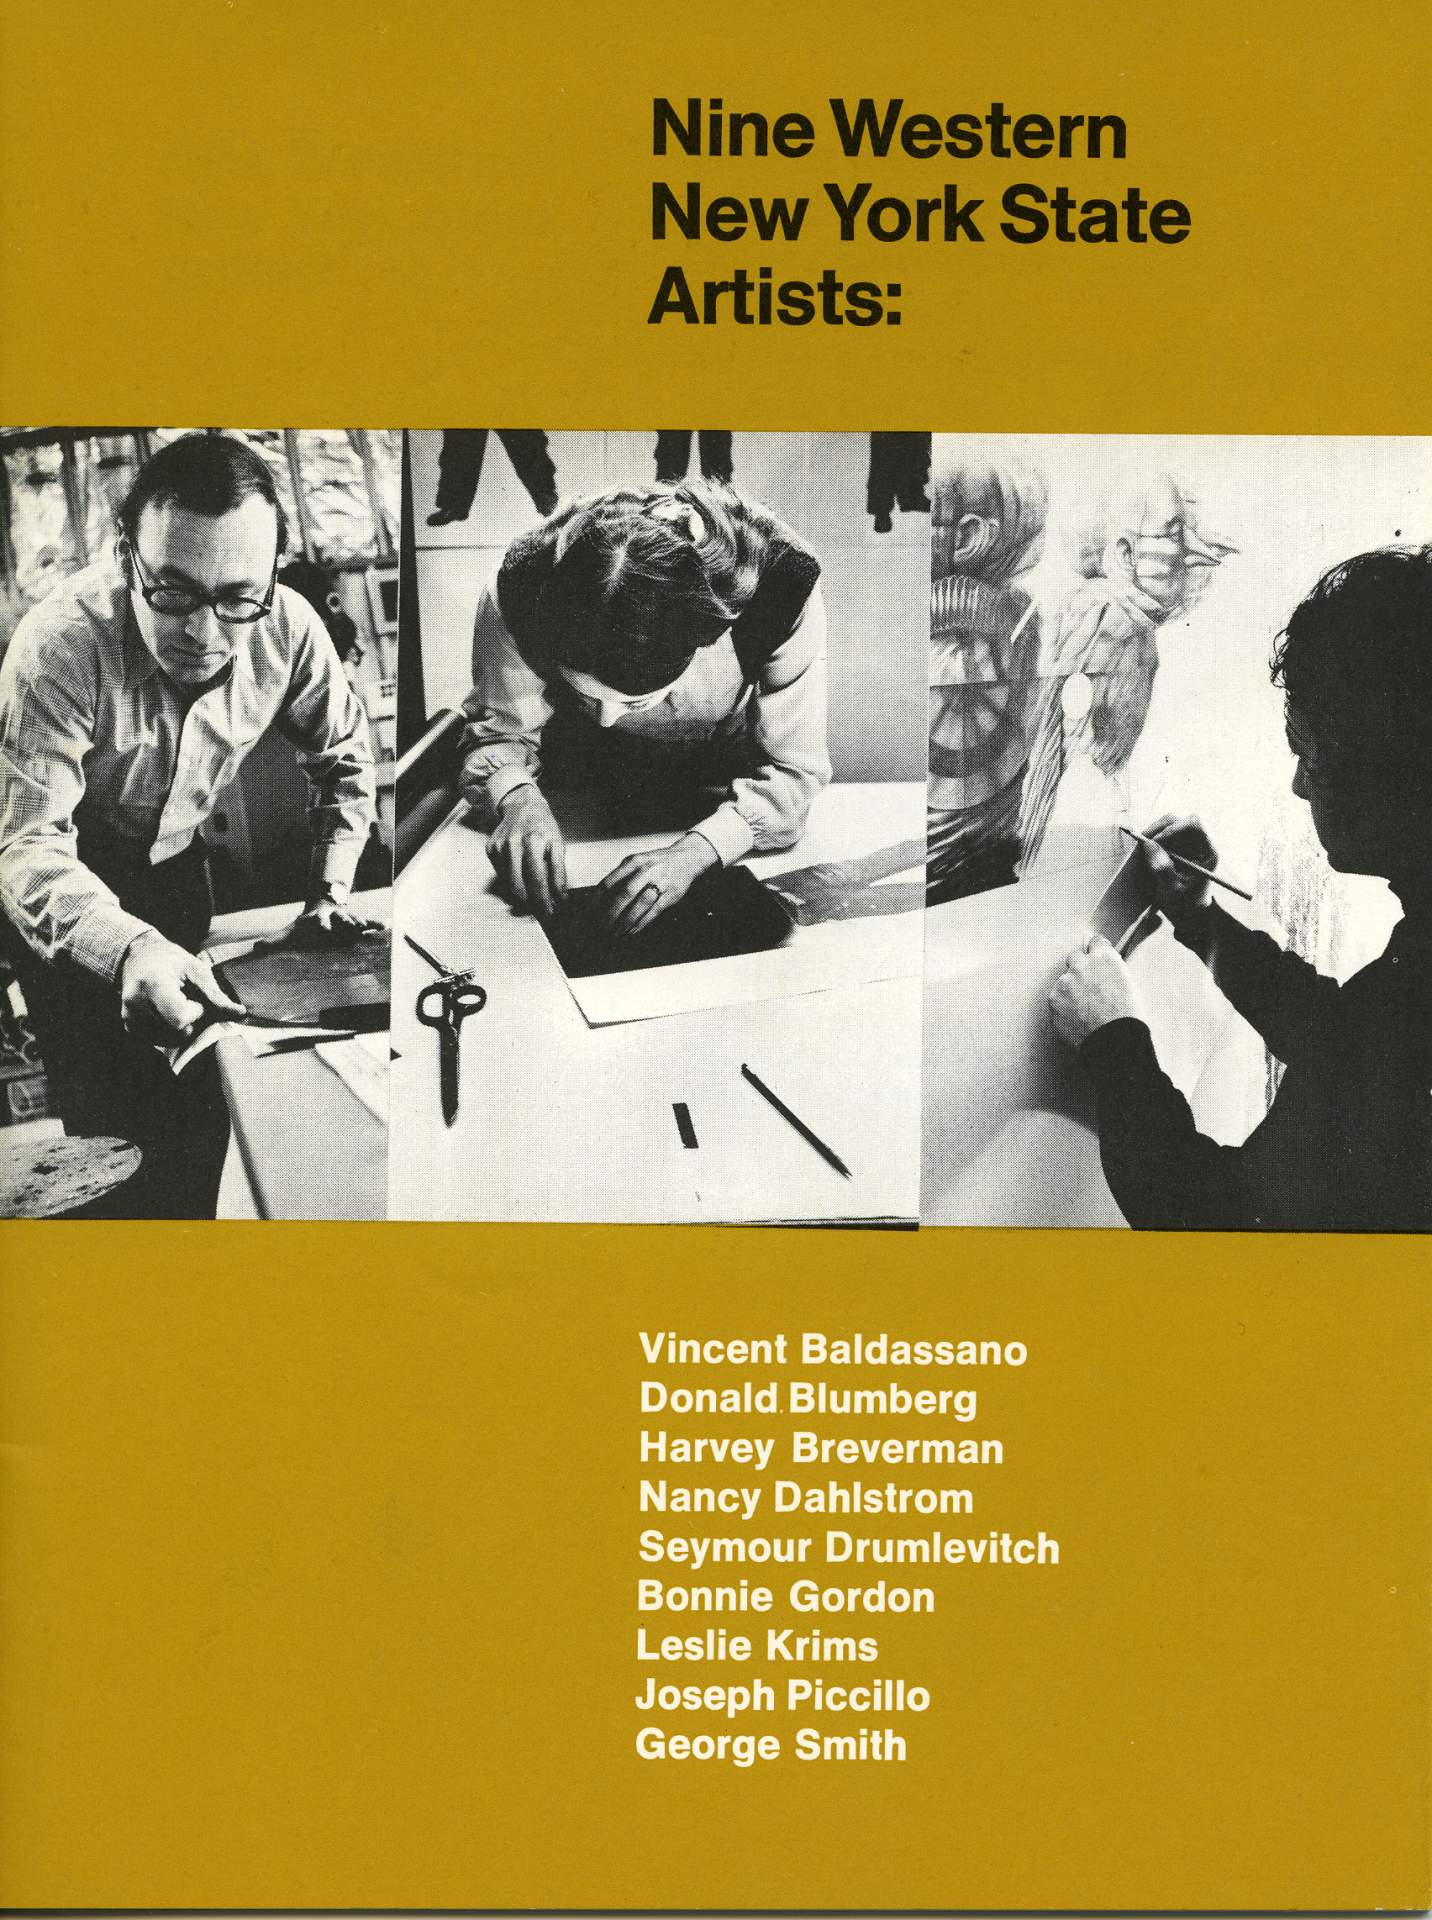 Nine Western New York State Artists exhibition program cover